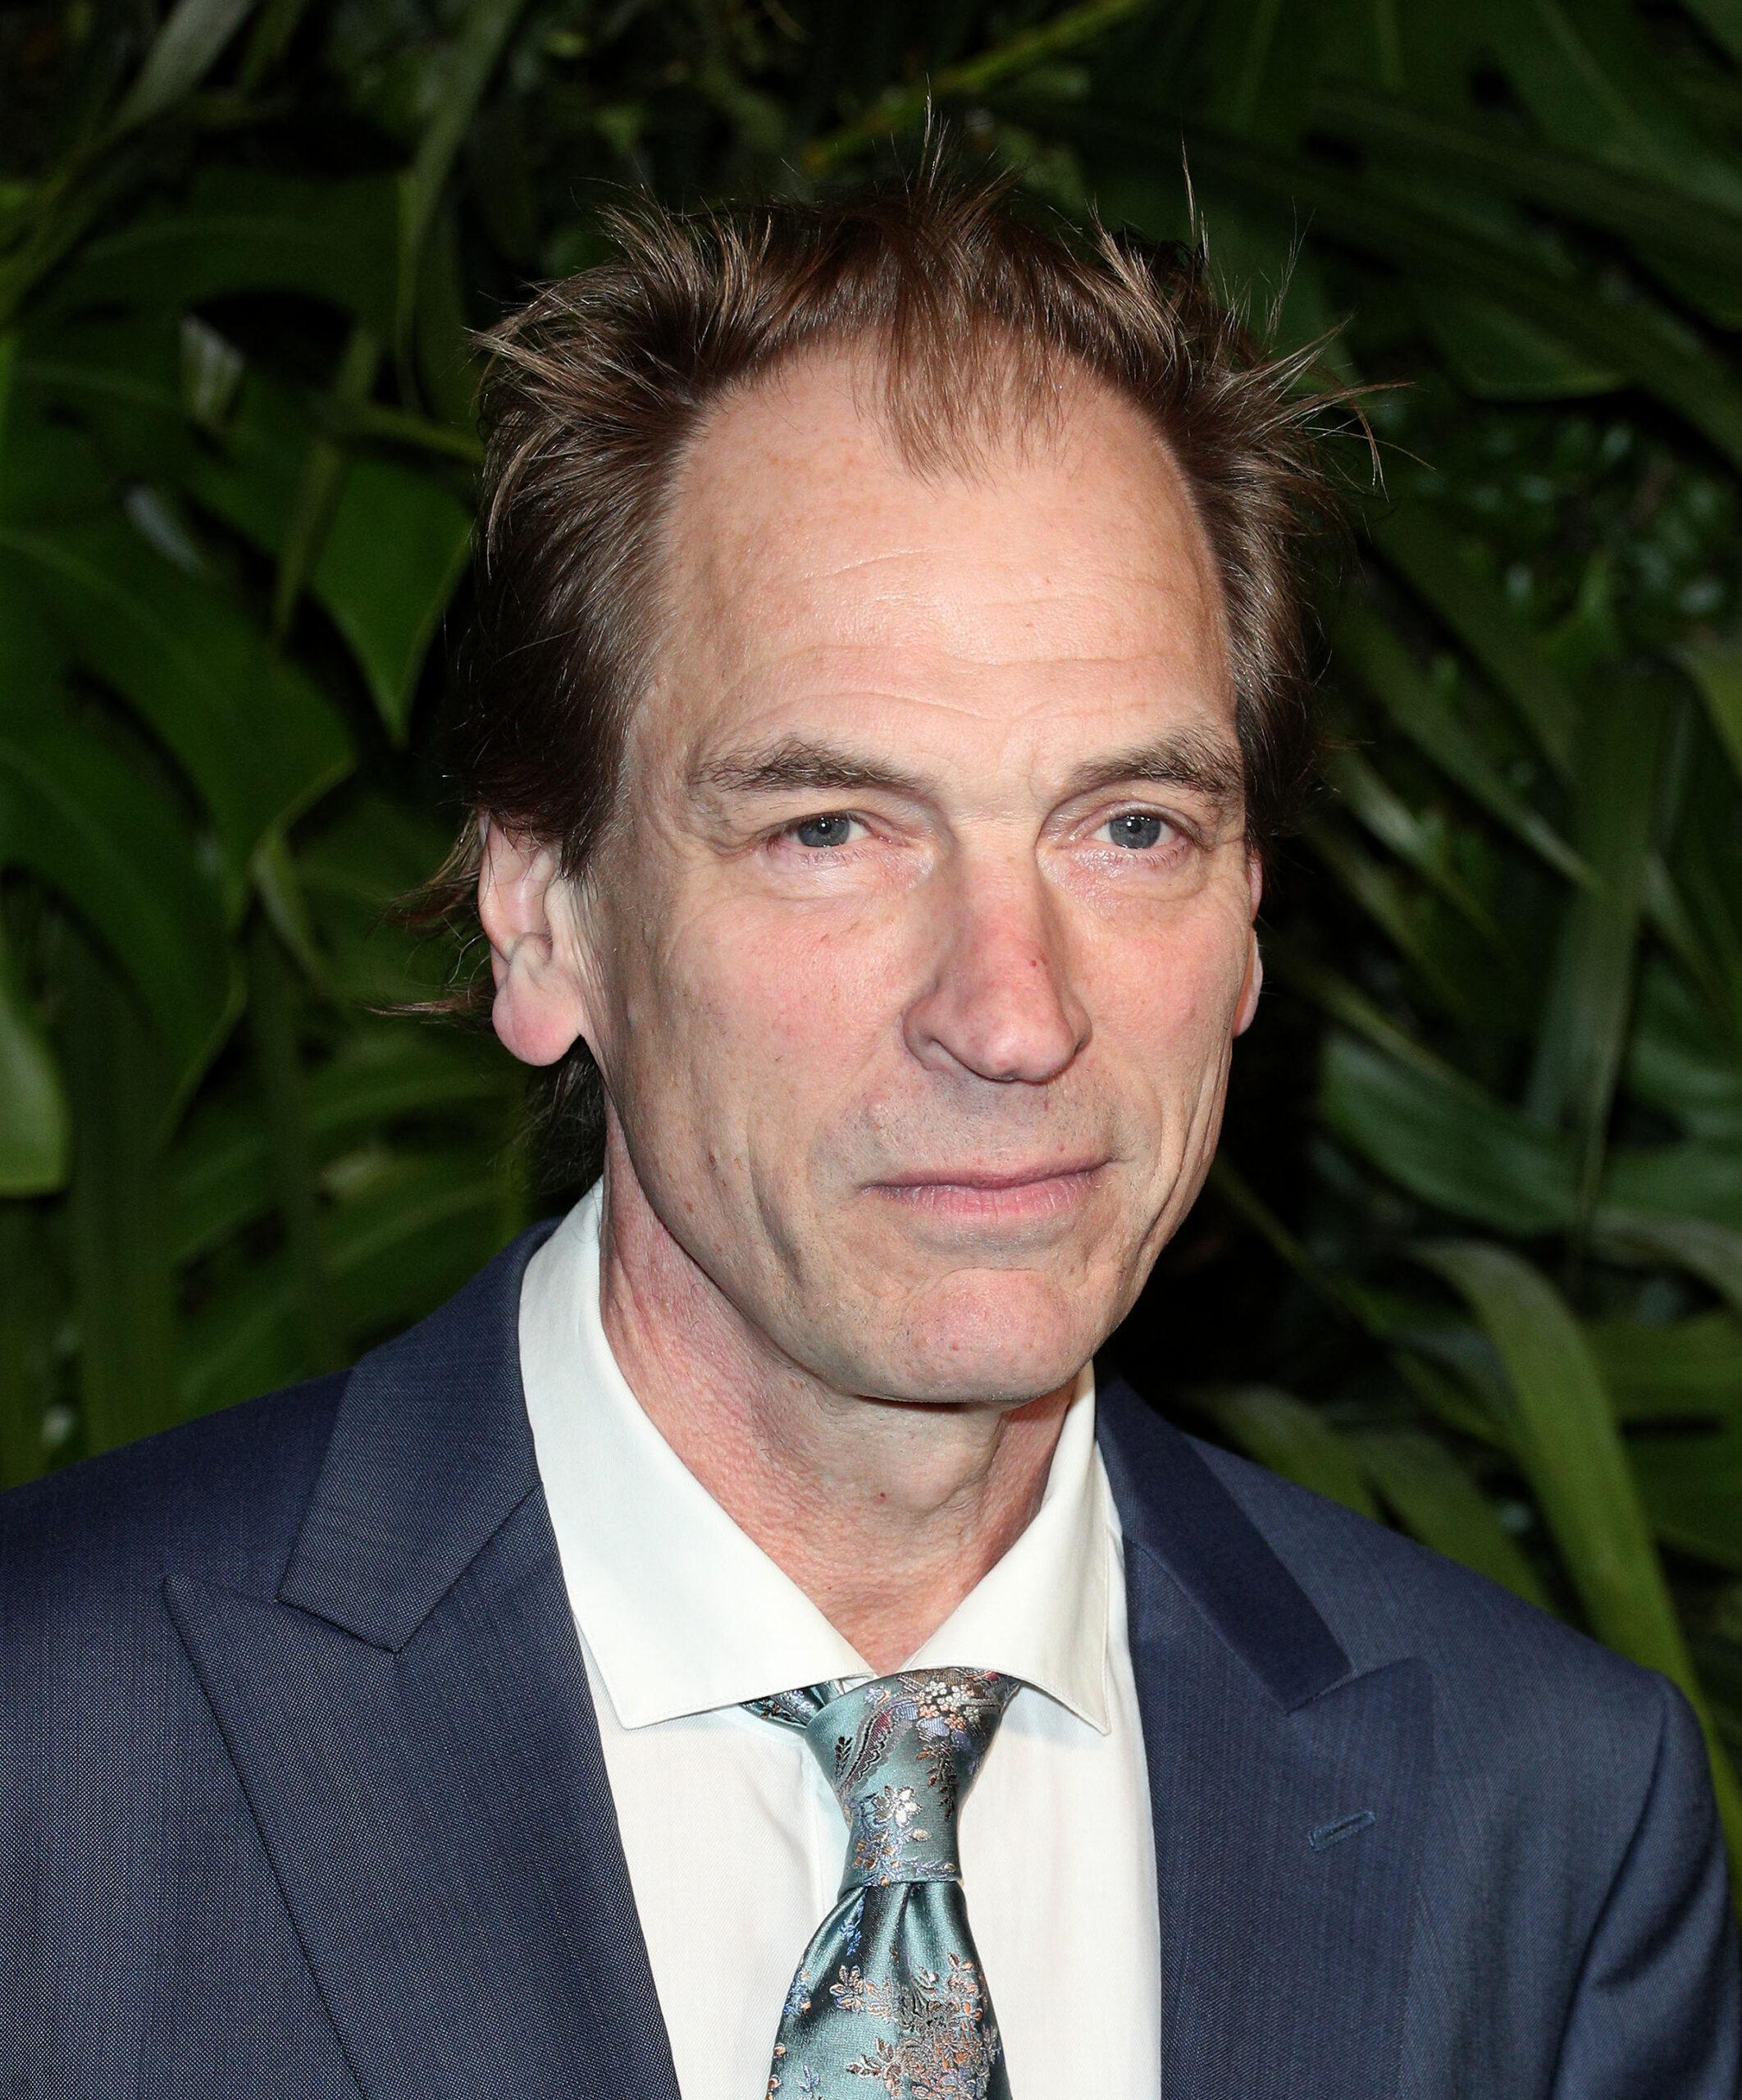 Human remains found in area where actor Julian Sands went missing